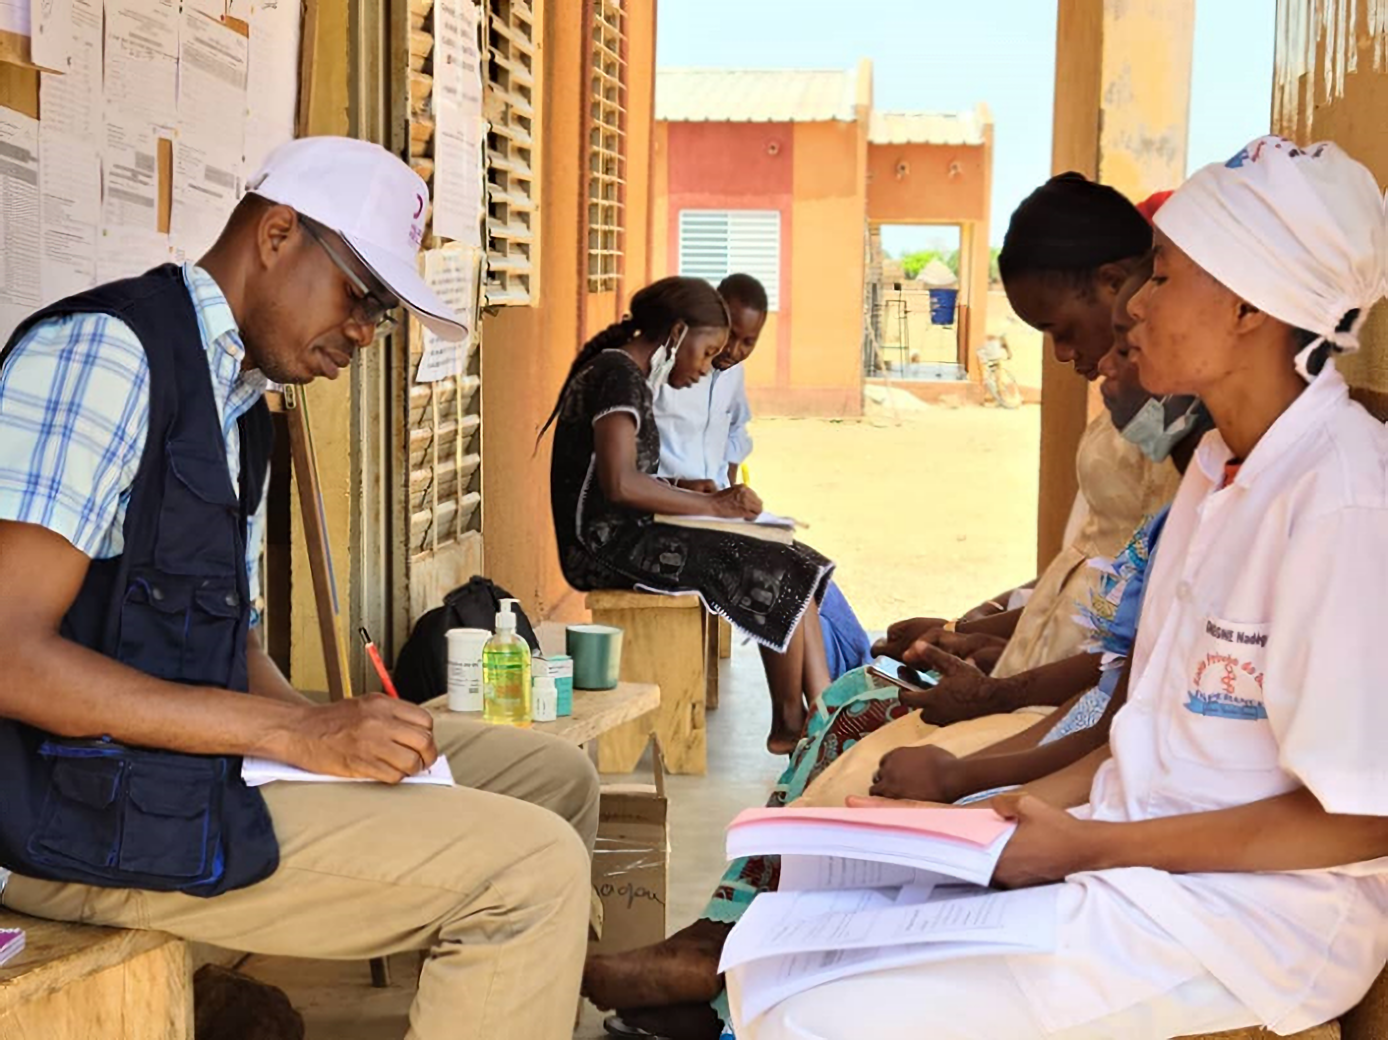 A man sits across from a female health worker outside of a building. The man is writing in a notebook.